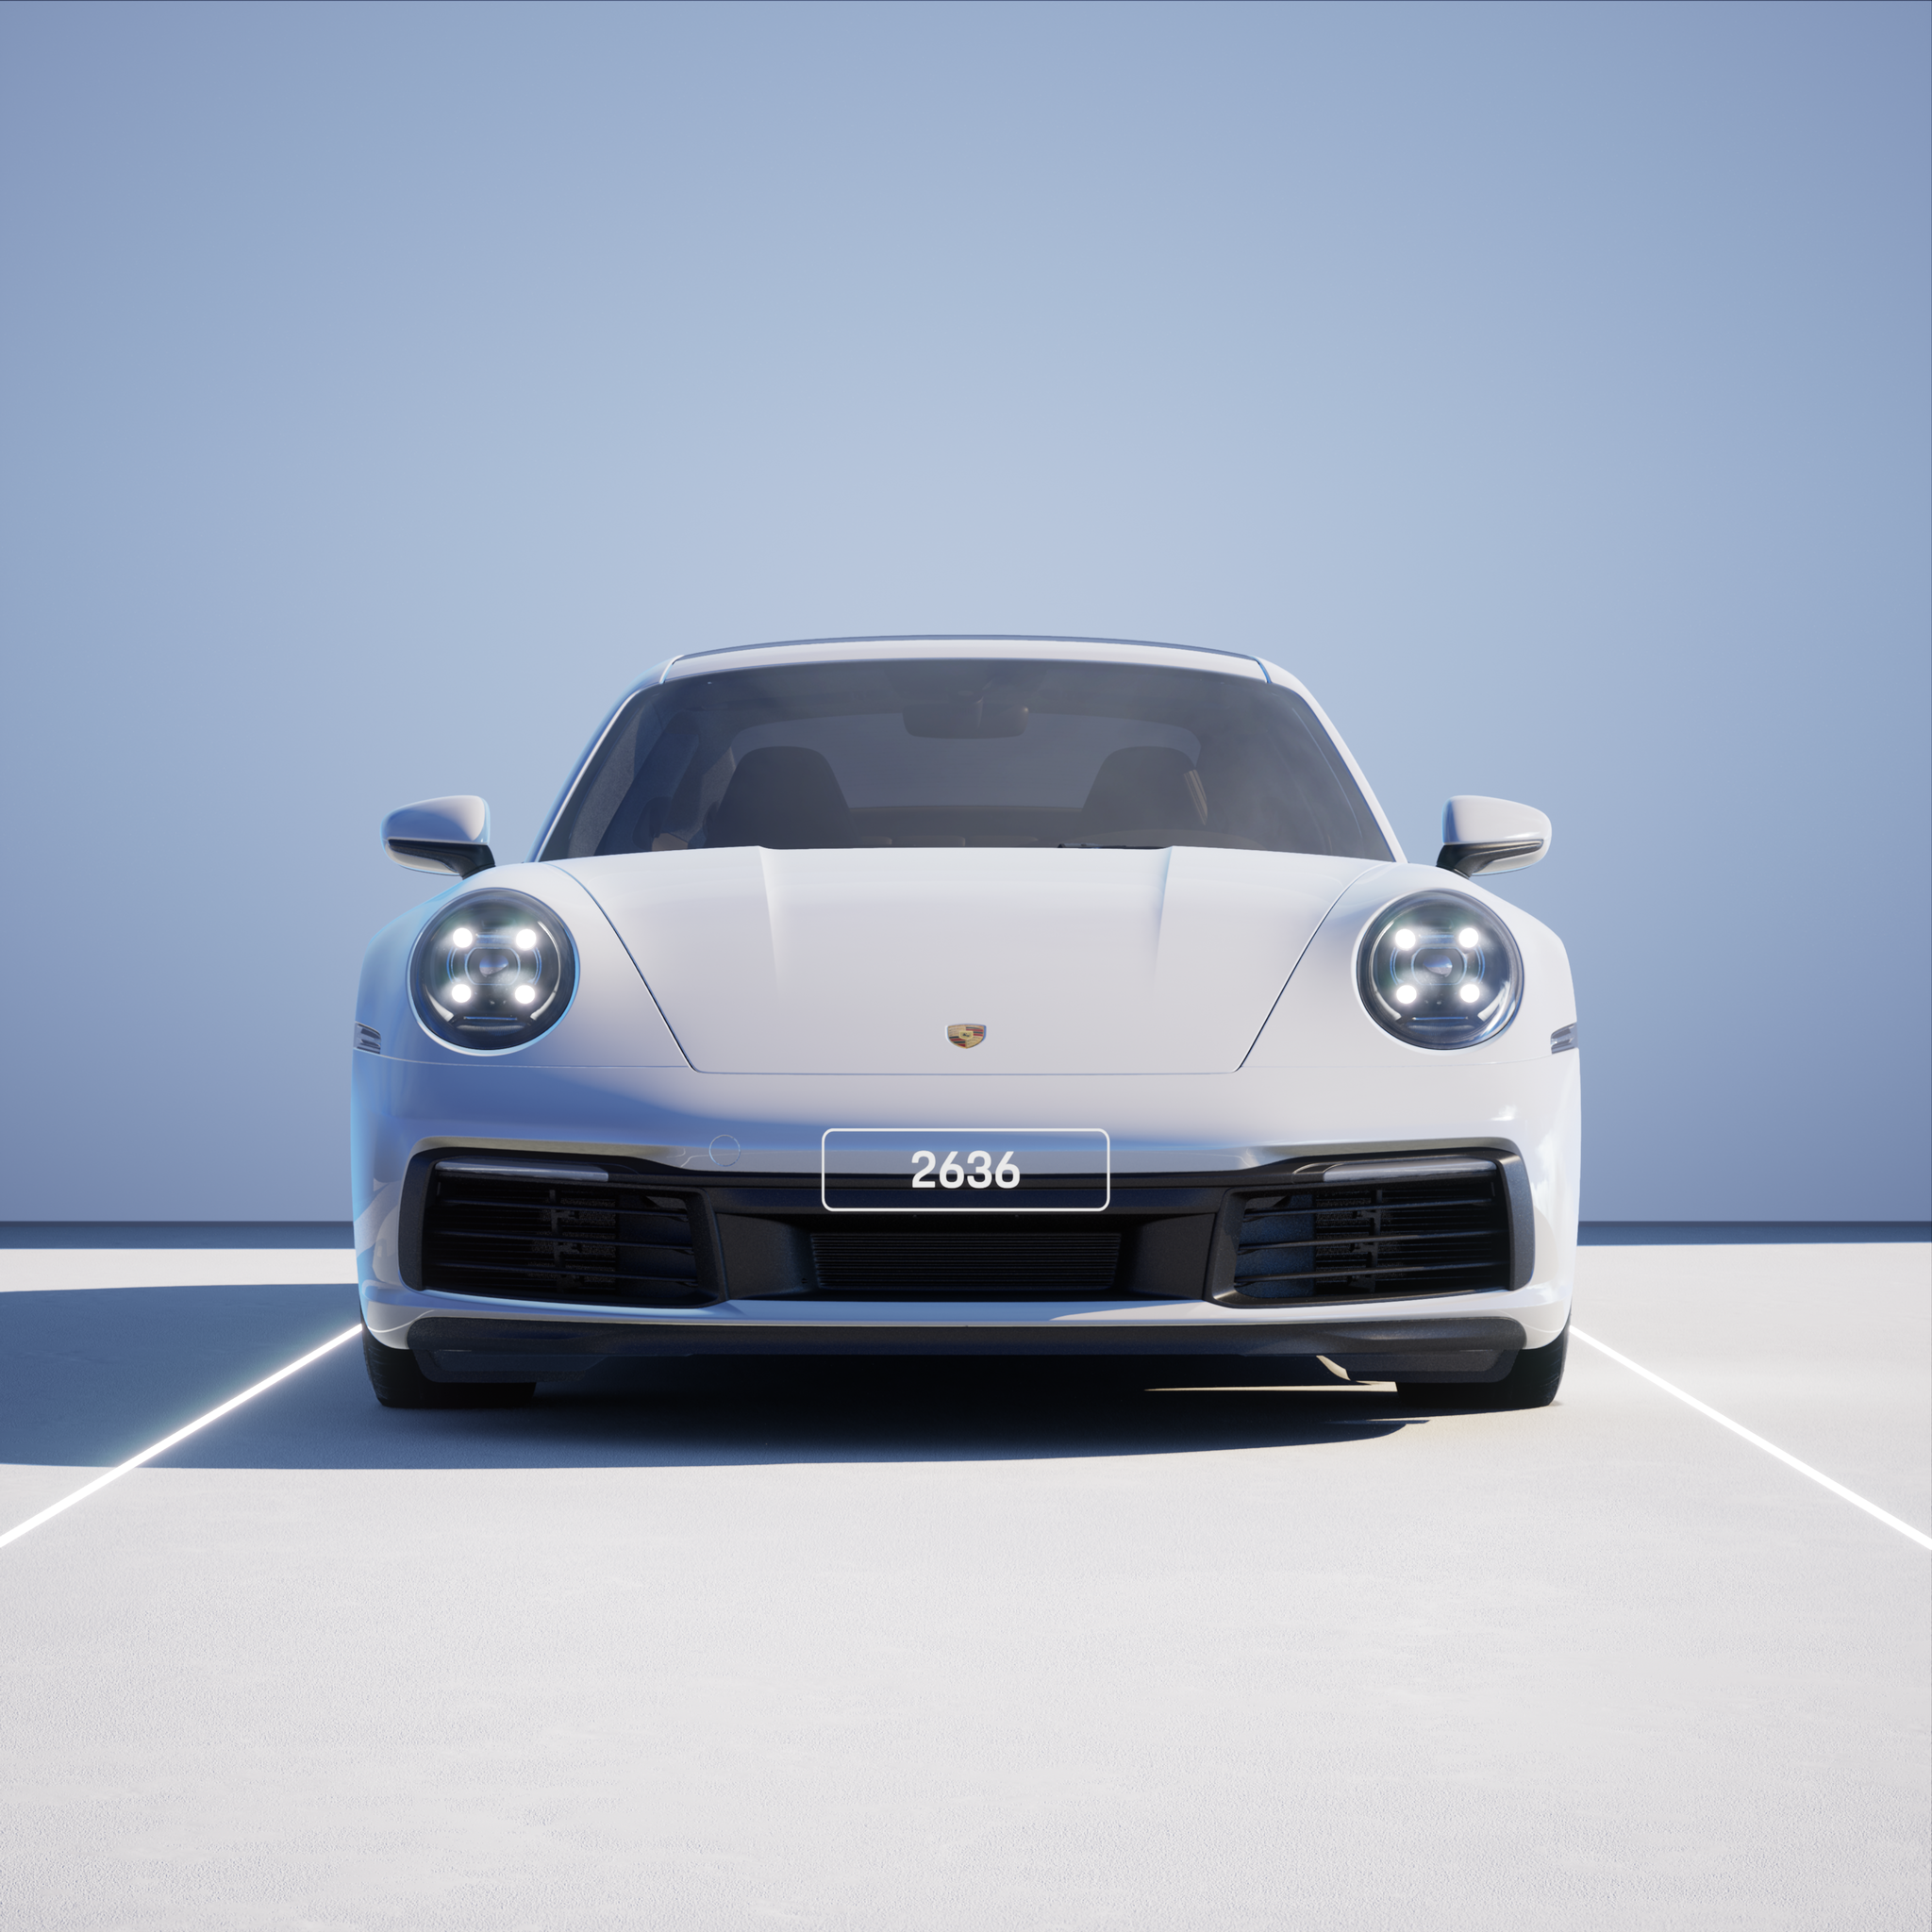 The PORSCHΞ 911 2636 image in phase